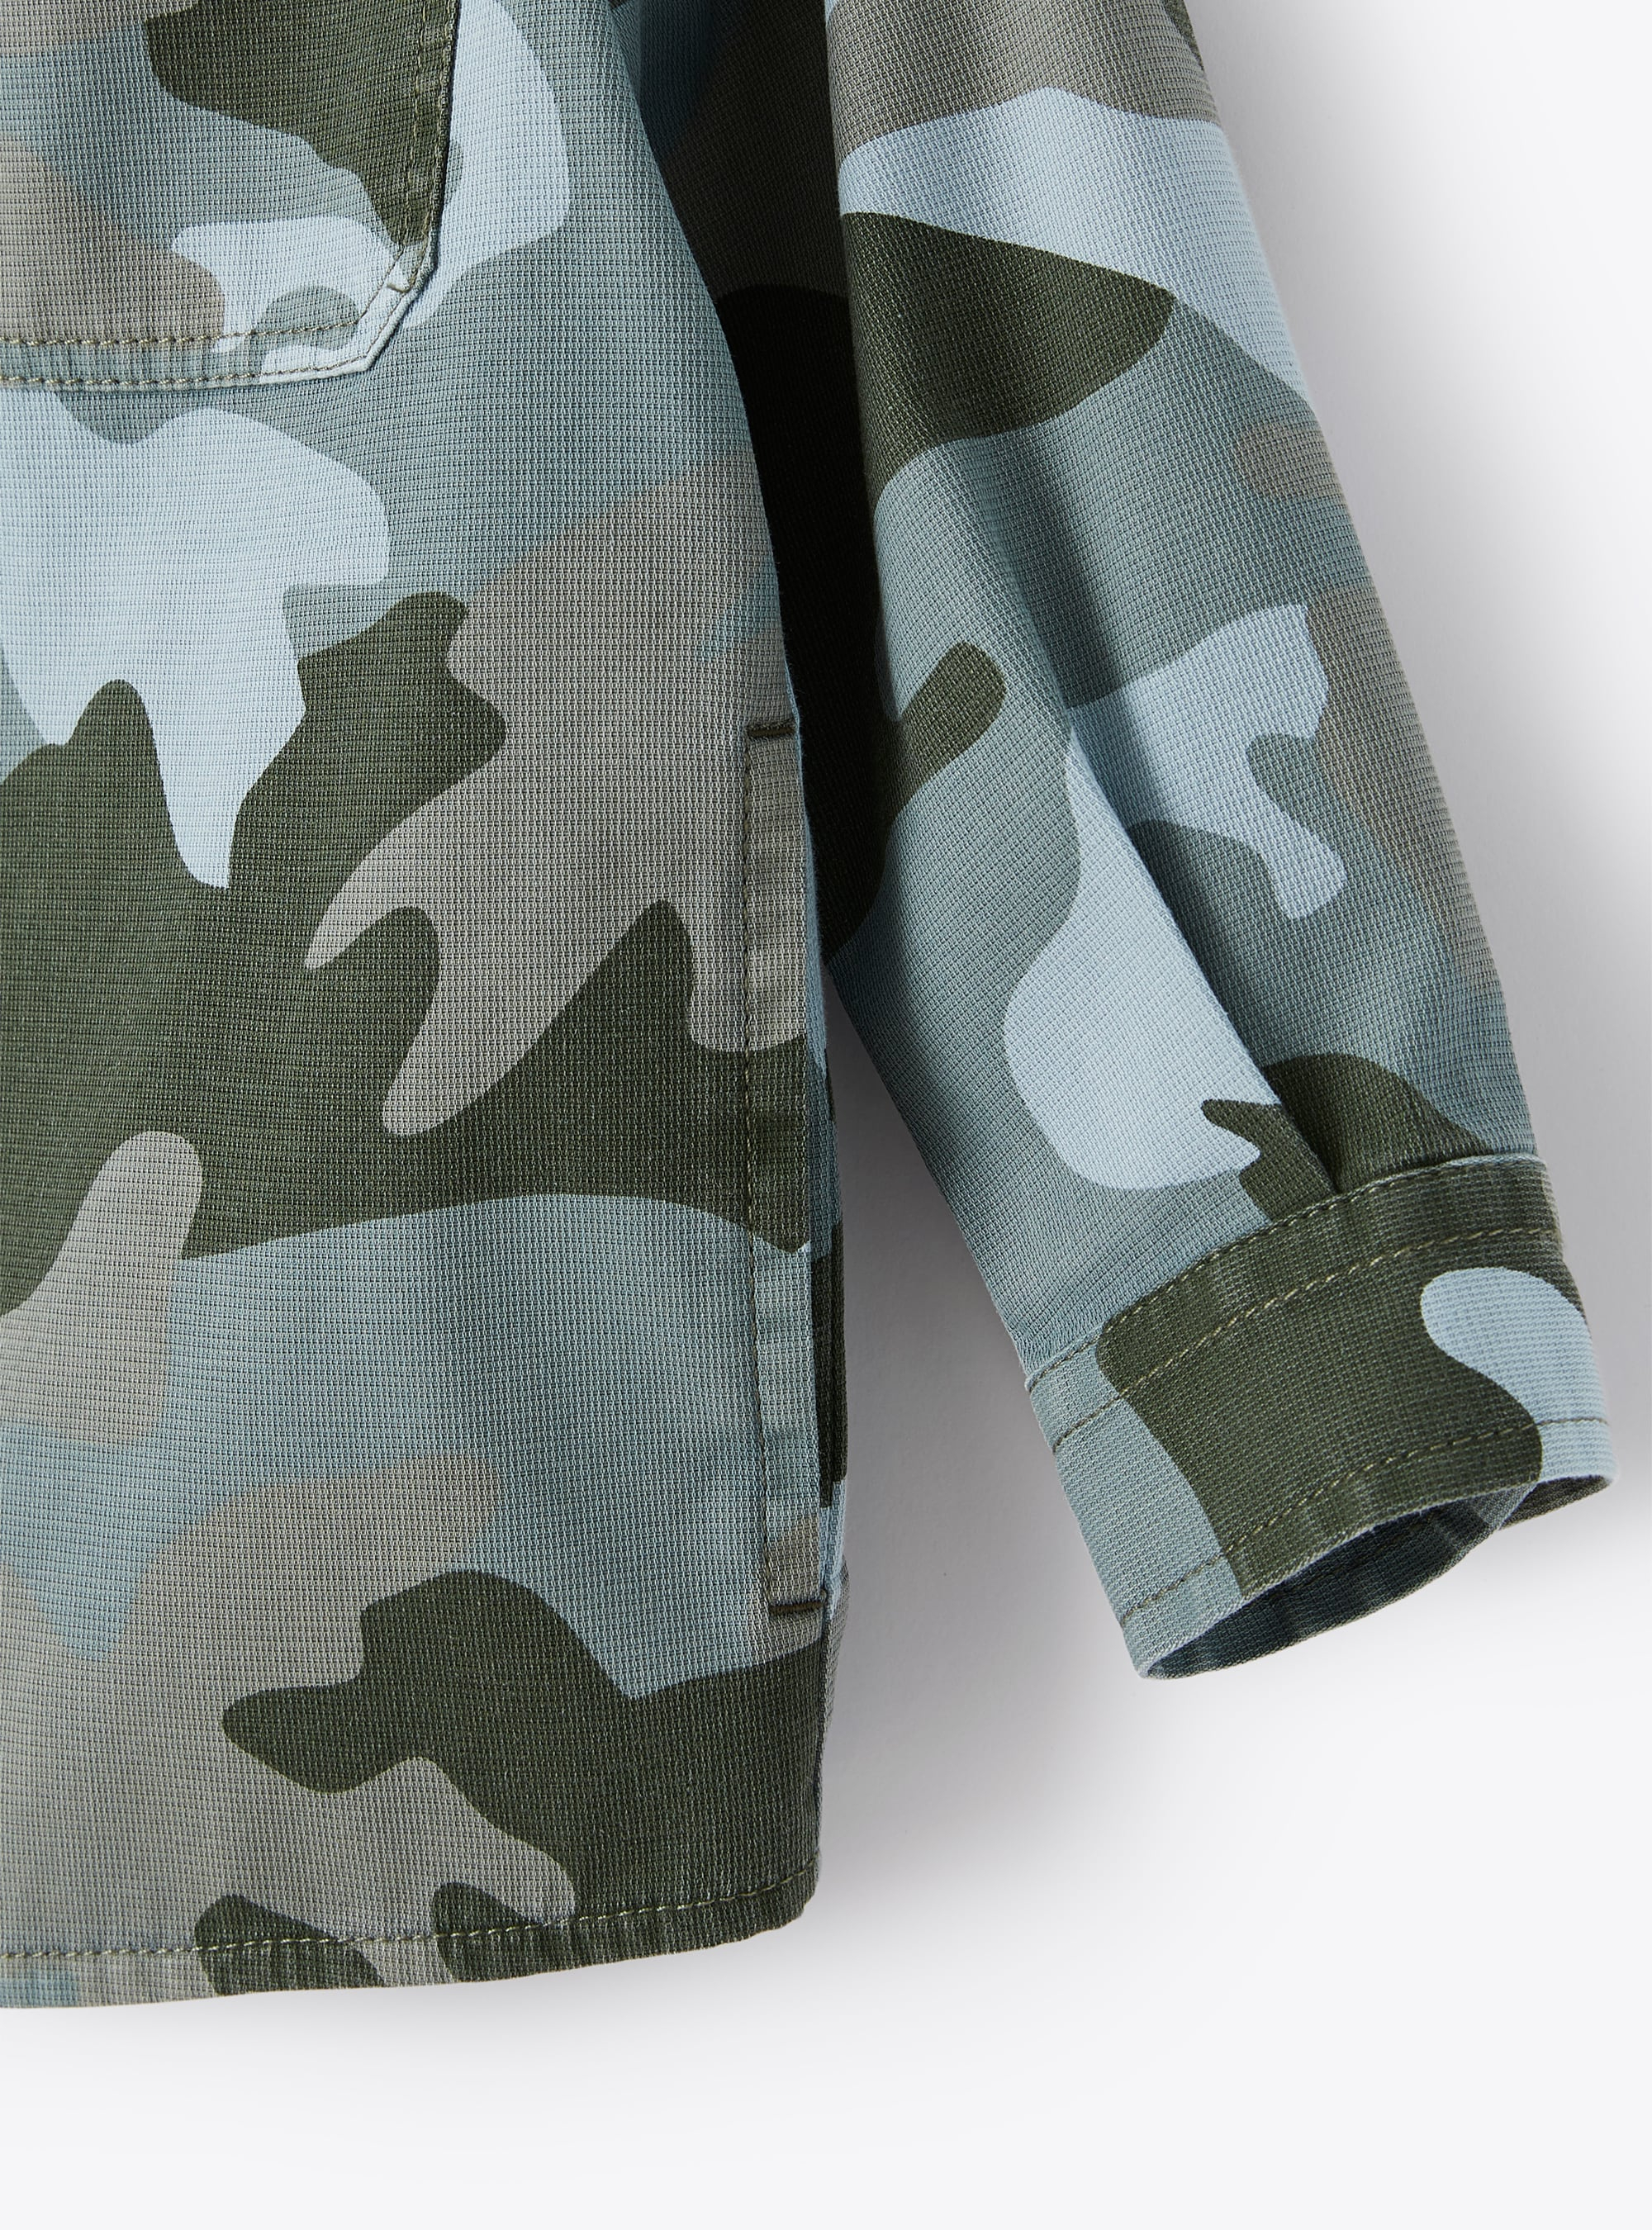 Shirt jacket in a camouflage pattern - Light blue | Il Gufo